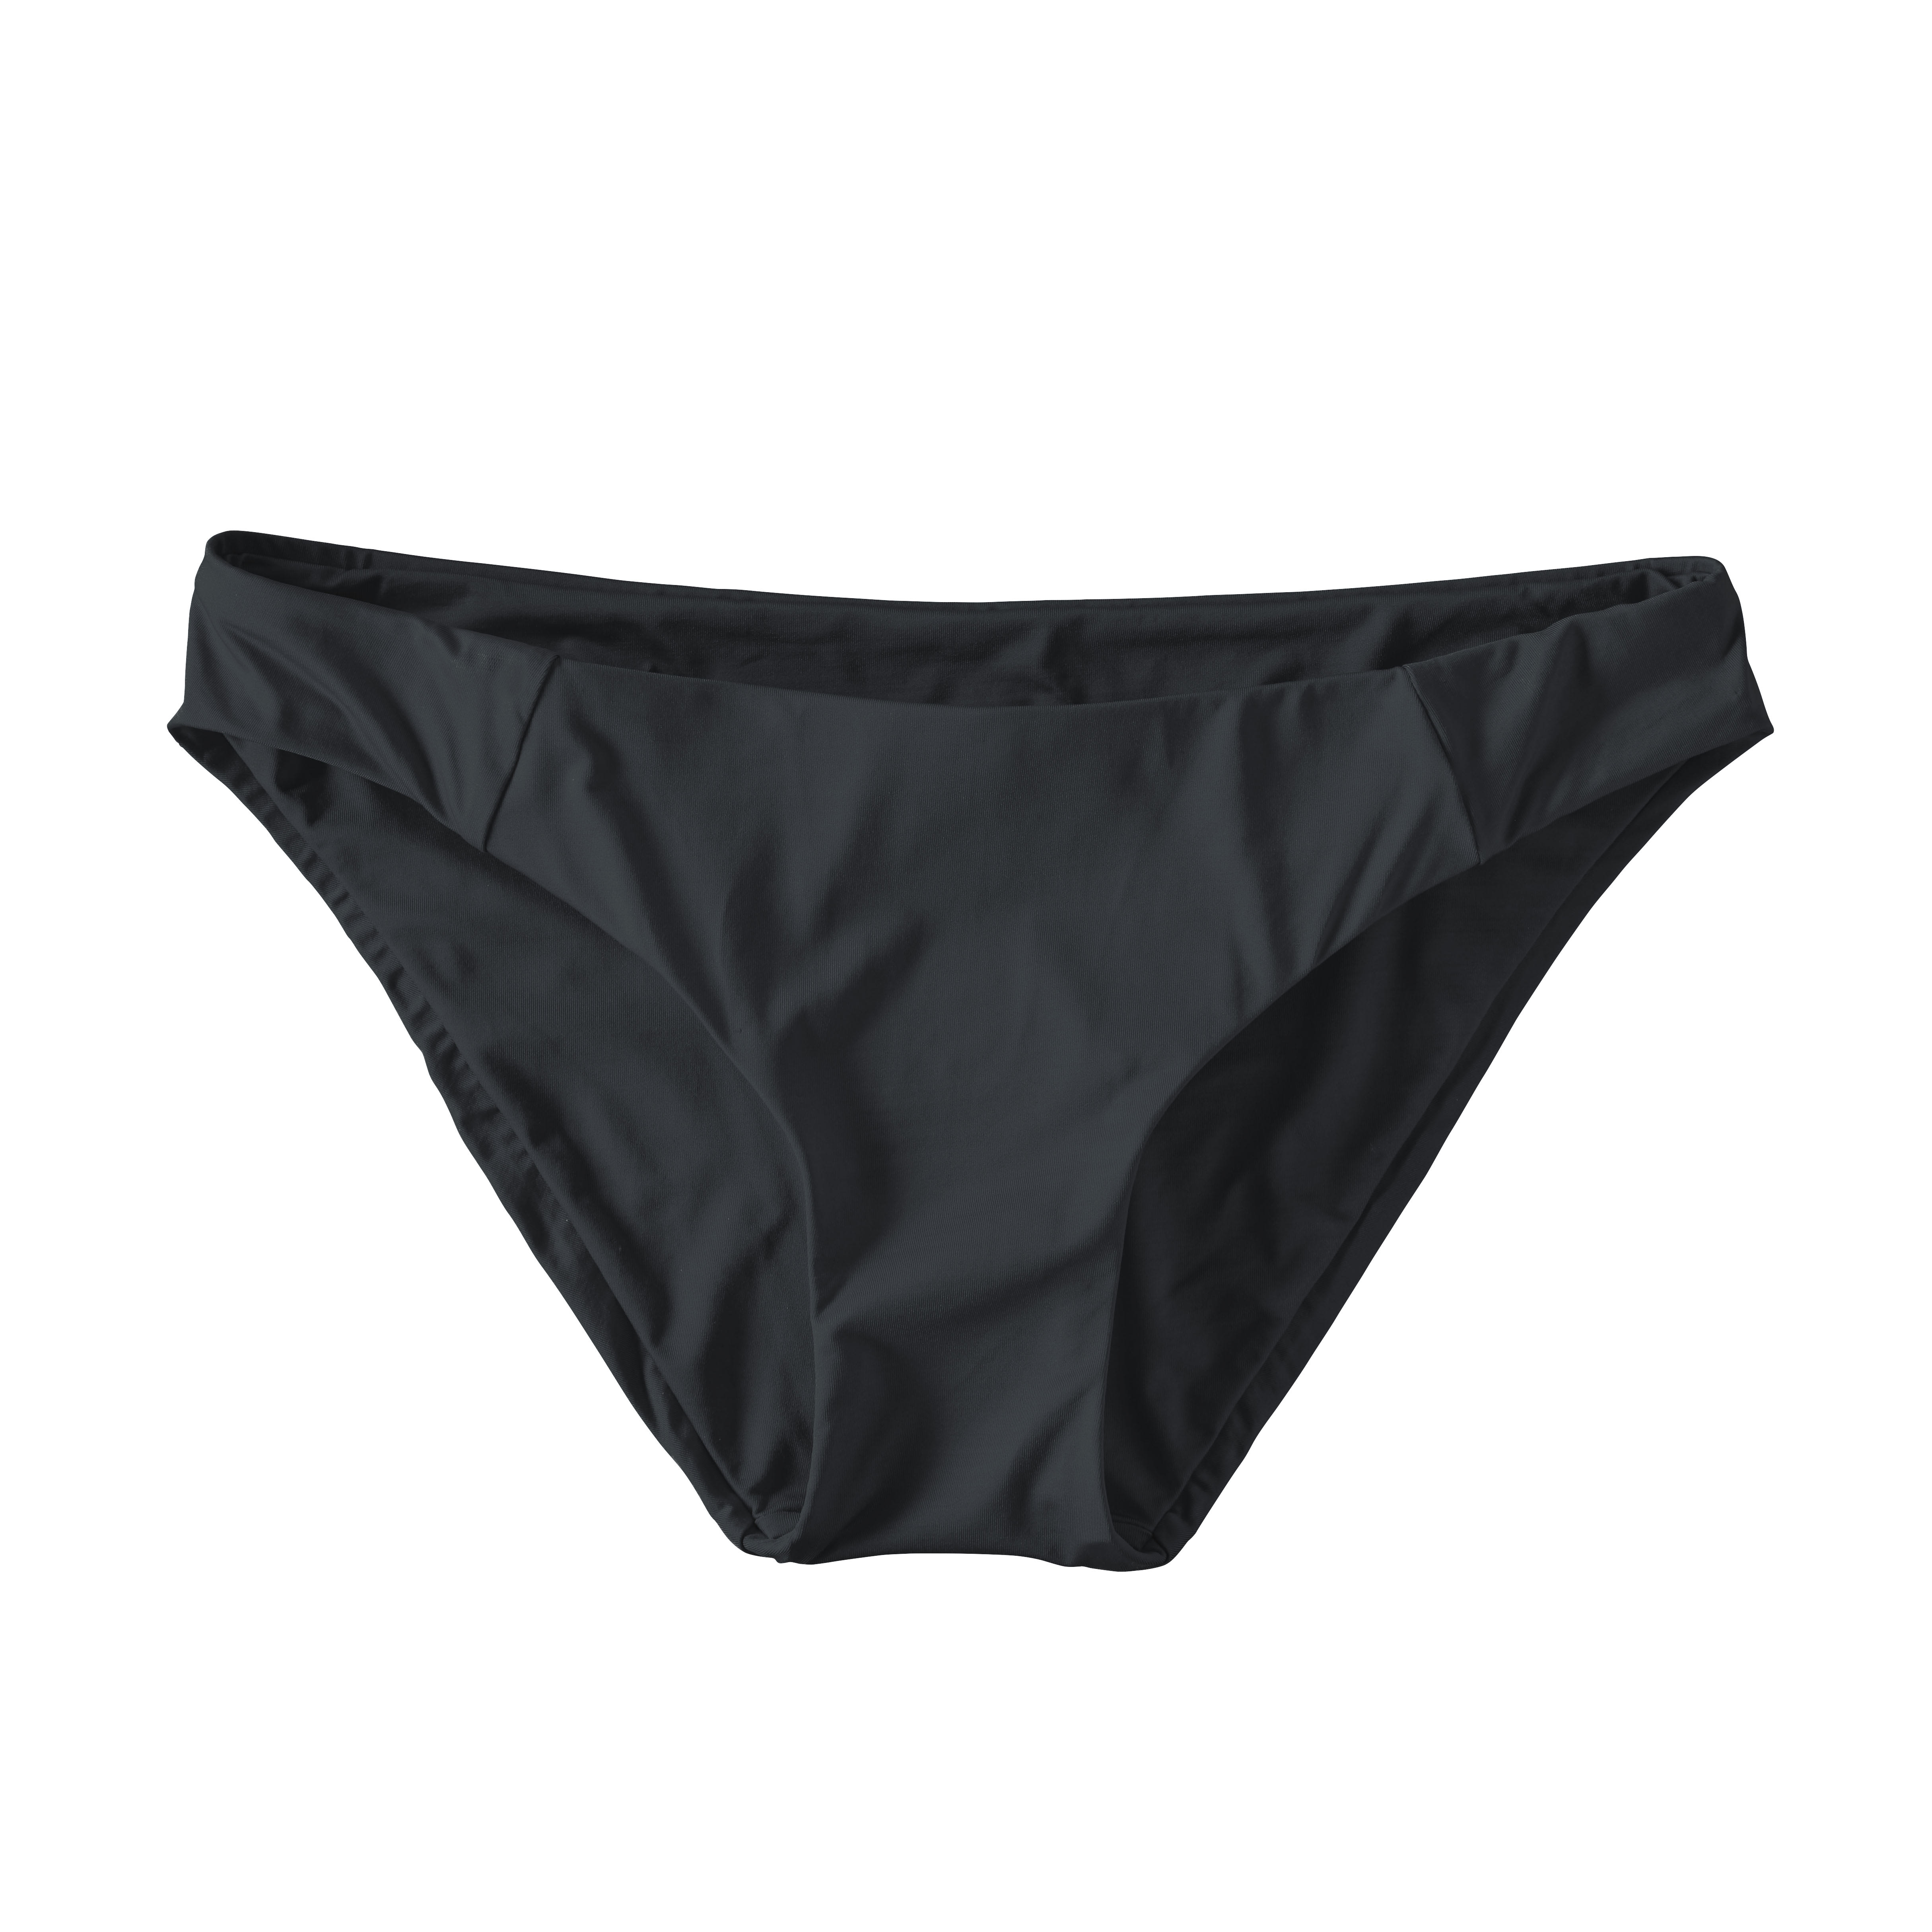 Buy Patagonia Women's Solid Sunamee Bikini Bottoms from Outnorth